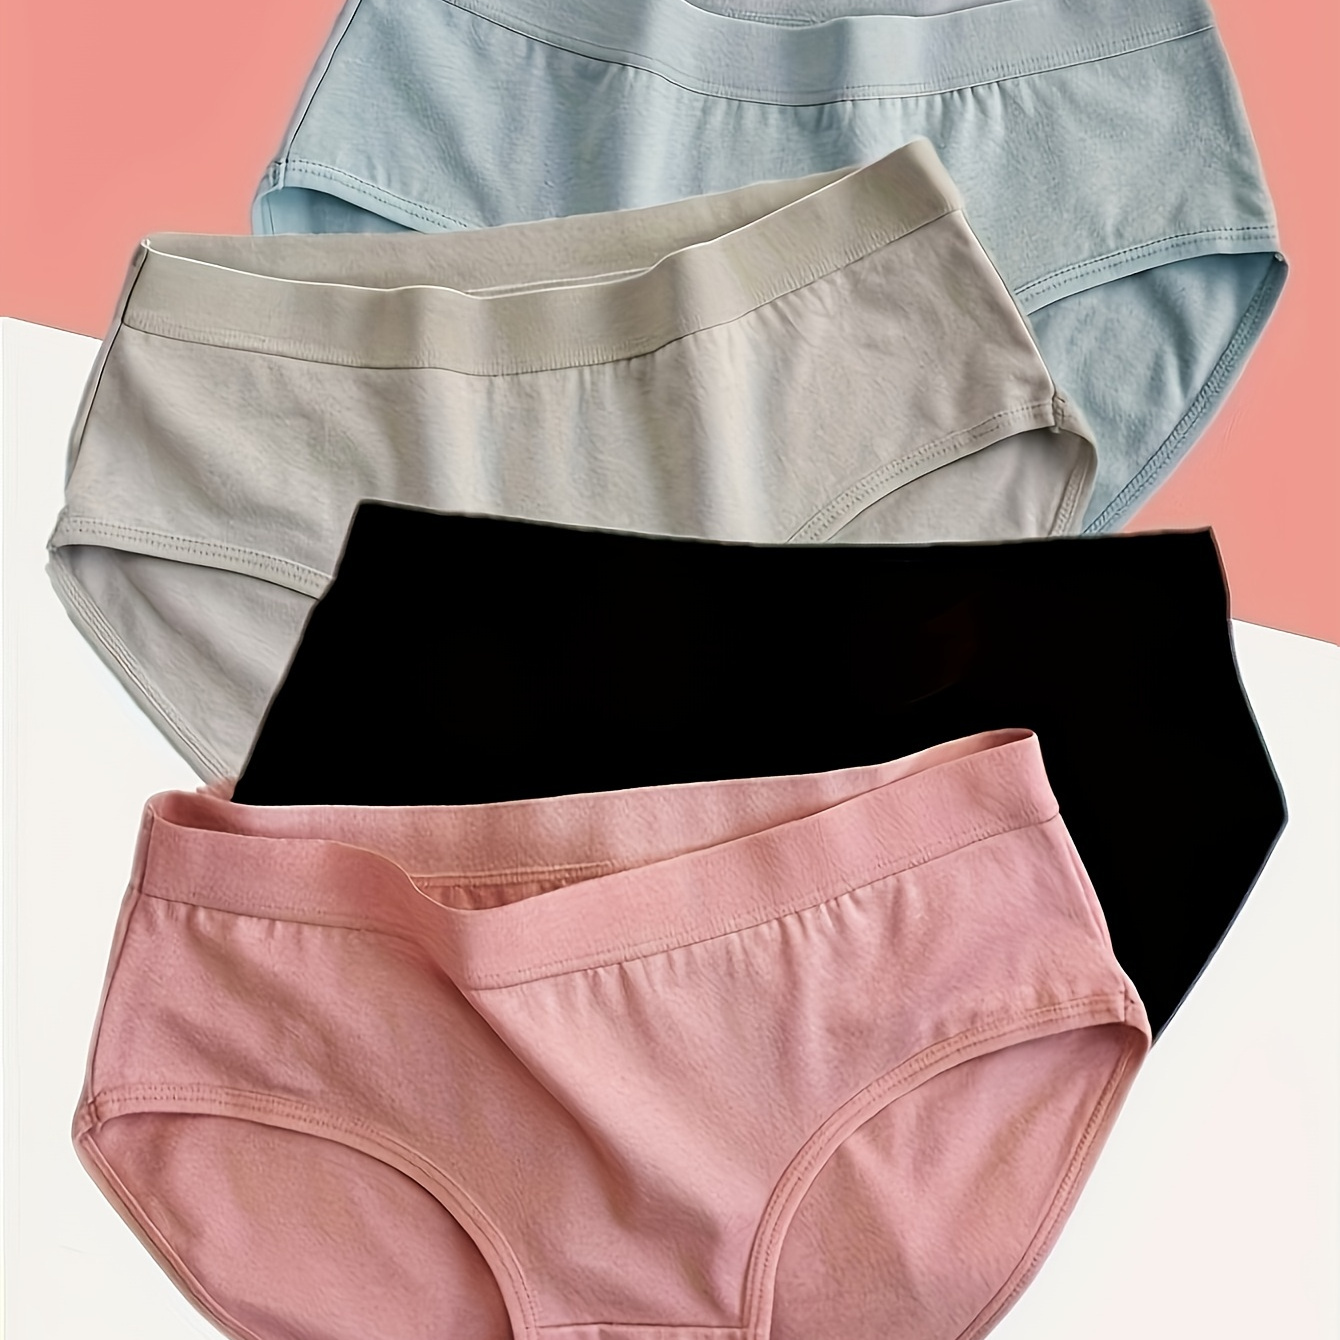 

4pcs Simple Solid Briefs, Comfy & Breathable Stretchy Intimates Panties, Women's Lingerie & Underwear